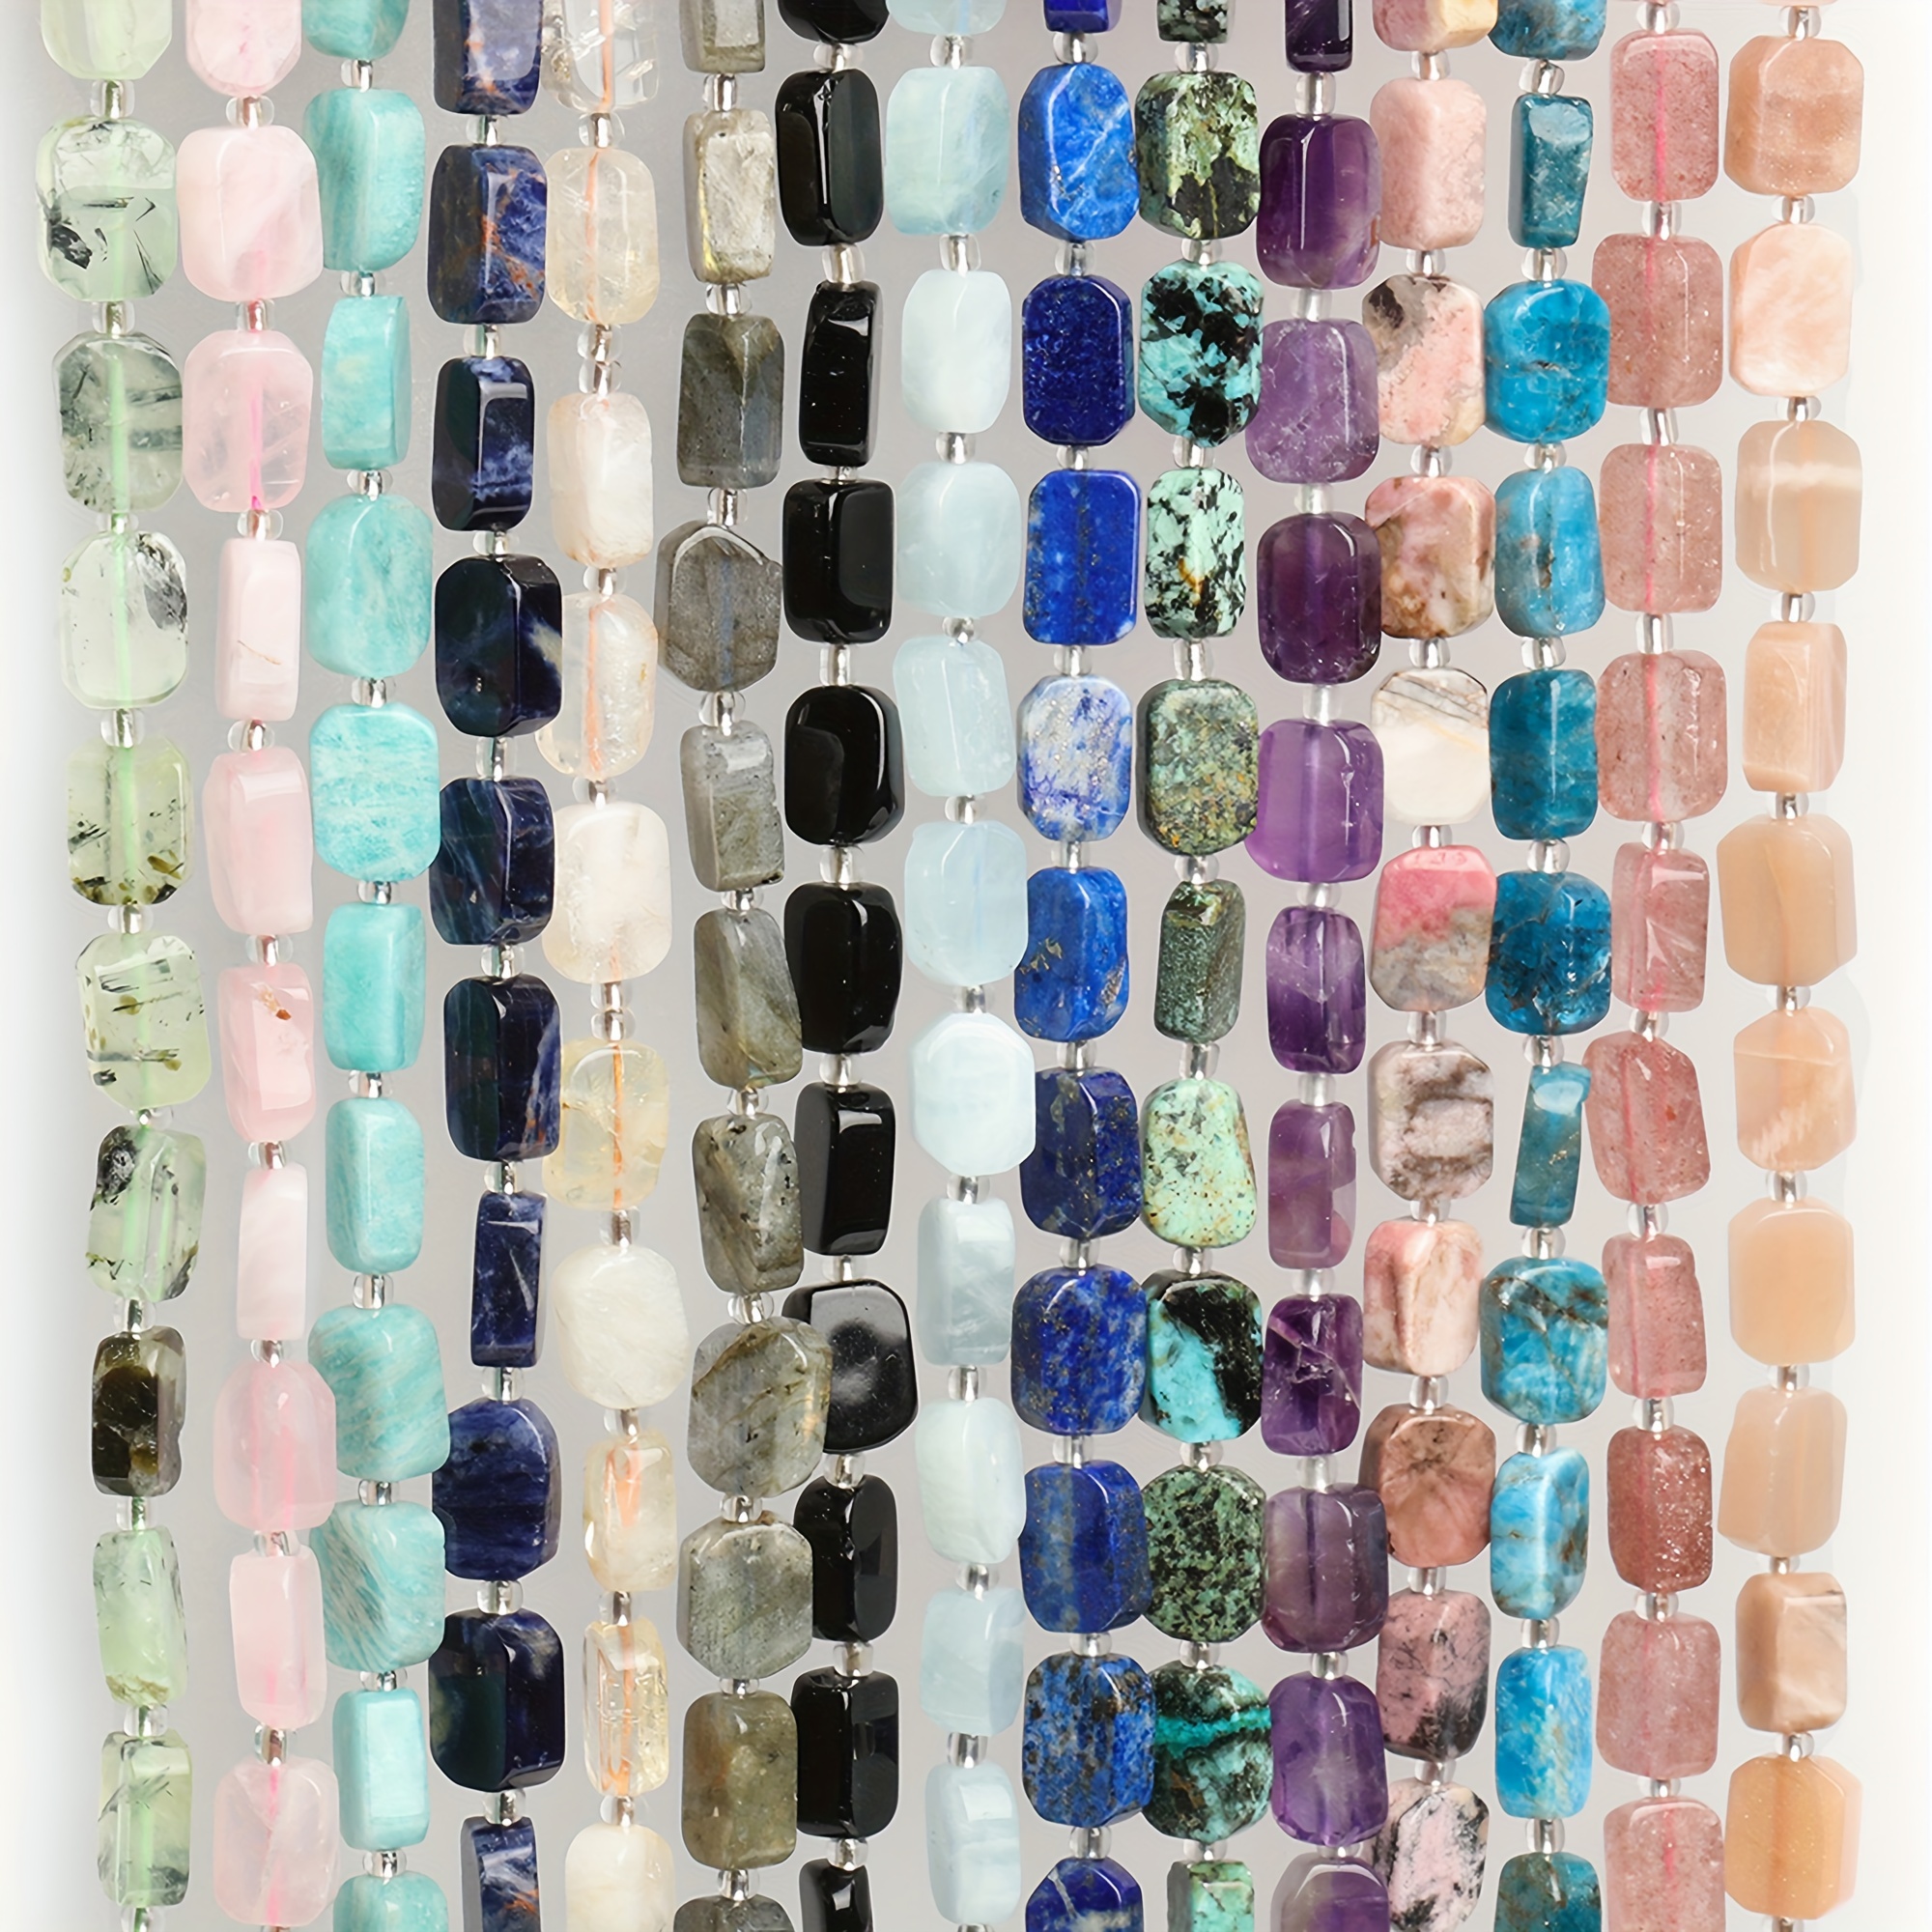 

Multi-colored Natural Stone Beads, Rectangle Cut Amethyst, Agate, Aquamarine, Loose Spacer Beads, 10-15pcs Set For Jewelry Making, Diy Earrings, Necklaces, Bracelets, For Men And Women